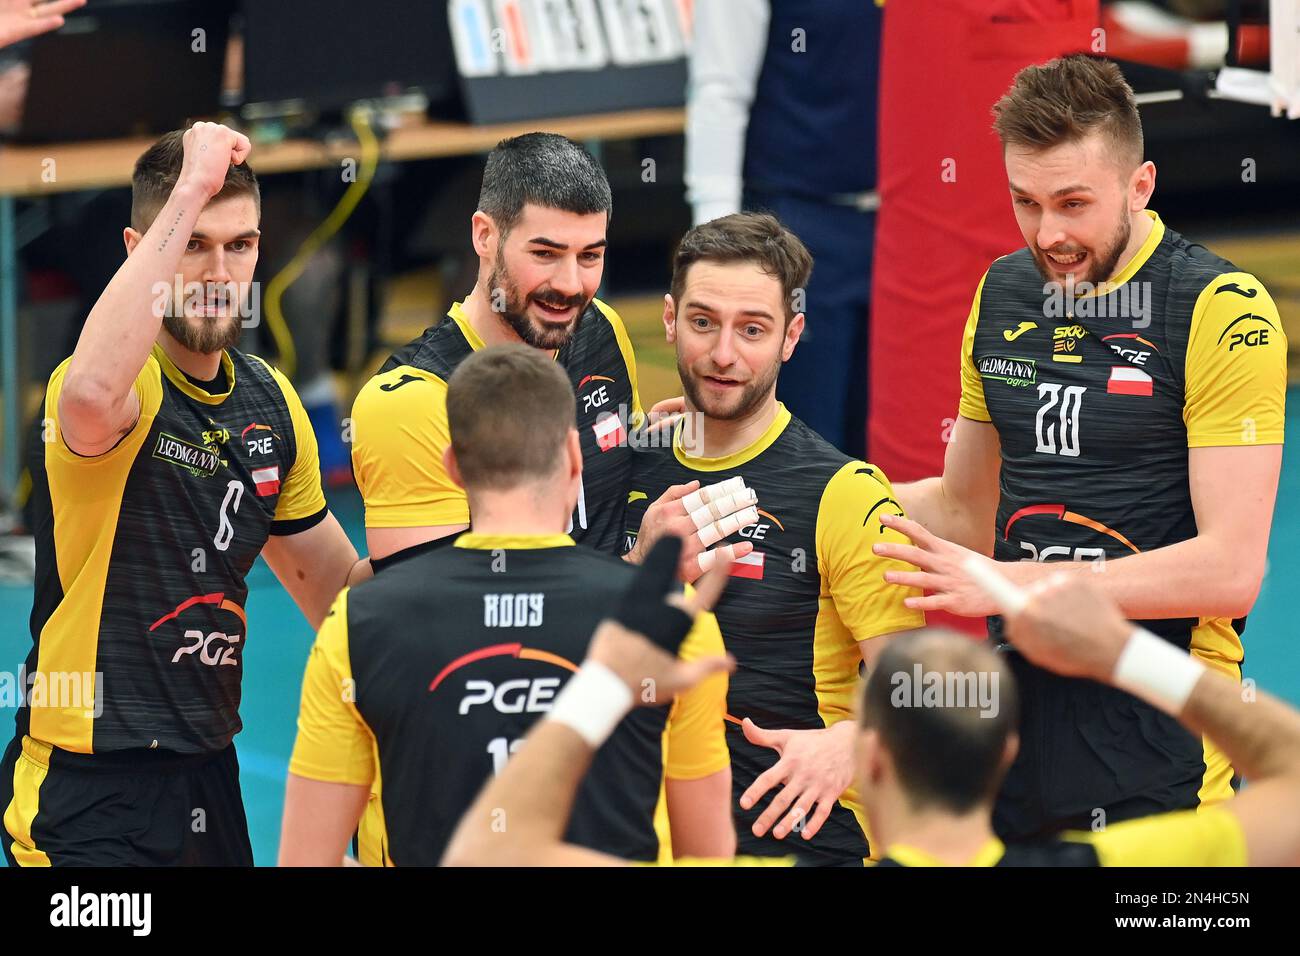 Karlovy Vary, Czech Republic. 08th Feb, 2023. Volleyball players of PGE Skra Belchatow in action during the CEV Volleyball Challenge Cup 2023 4th Finals match VK CEZ Karlovarsko vs. PGE Skra Belchatow (POL) in Karlovy Vary, Czech Republic, February 8, 2023. Credit: Slavomir Kubes/CTK Photo/Alamy Live News Stock Photo